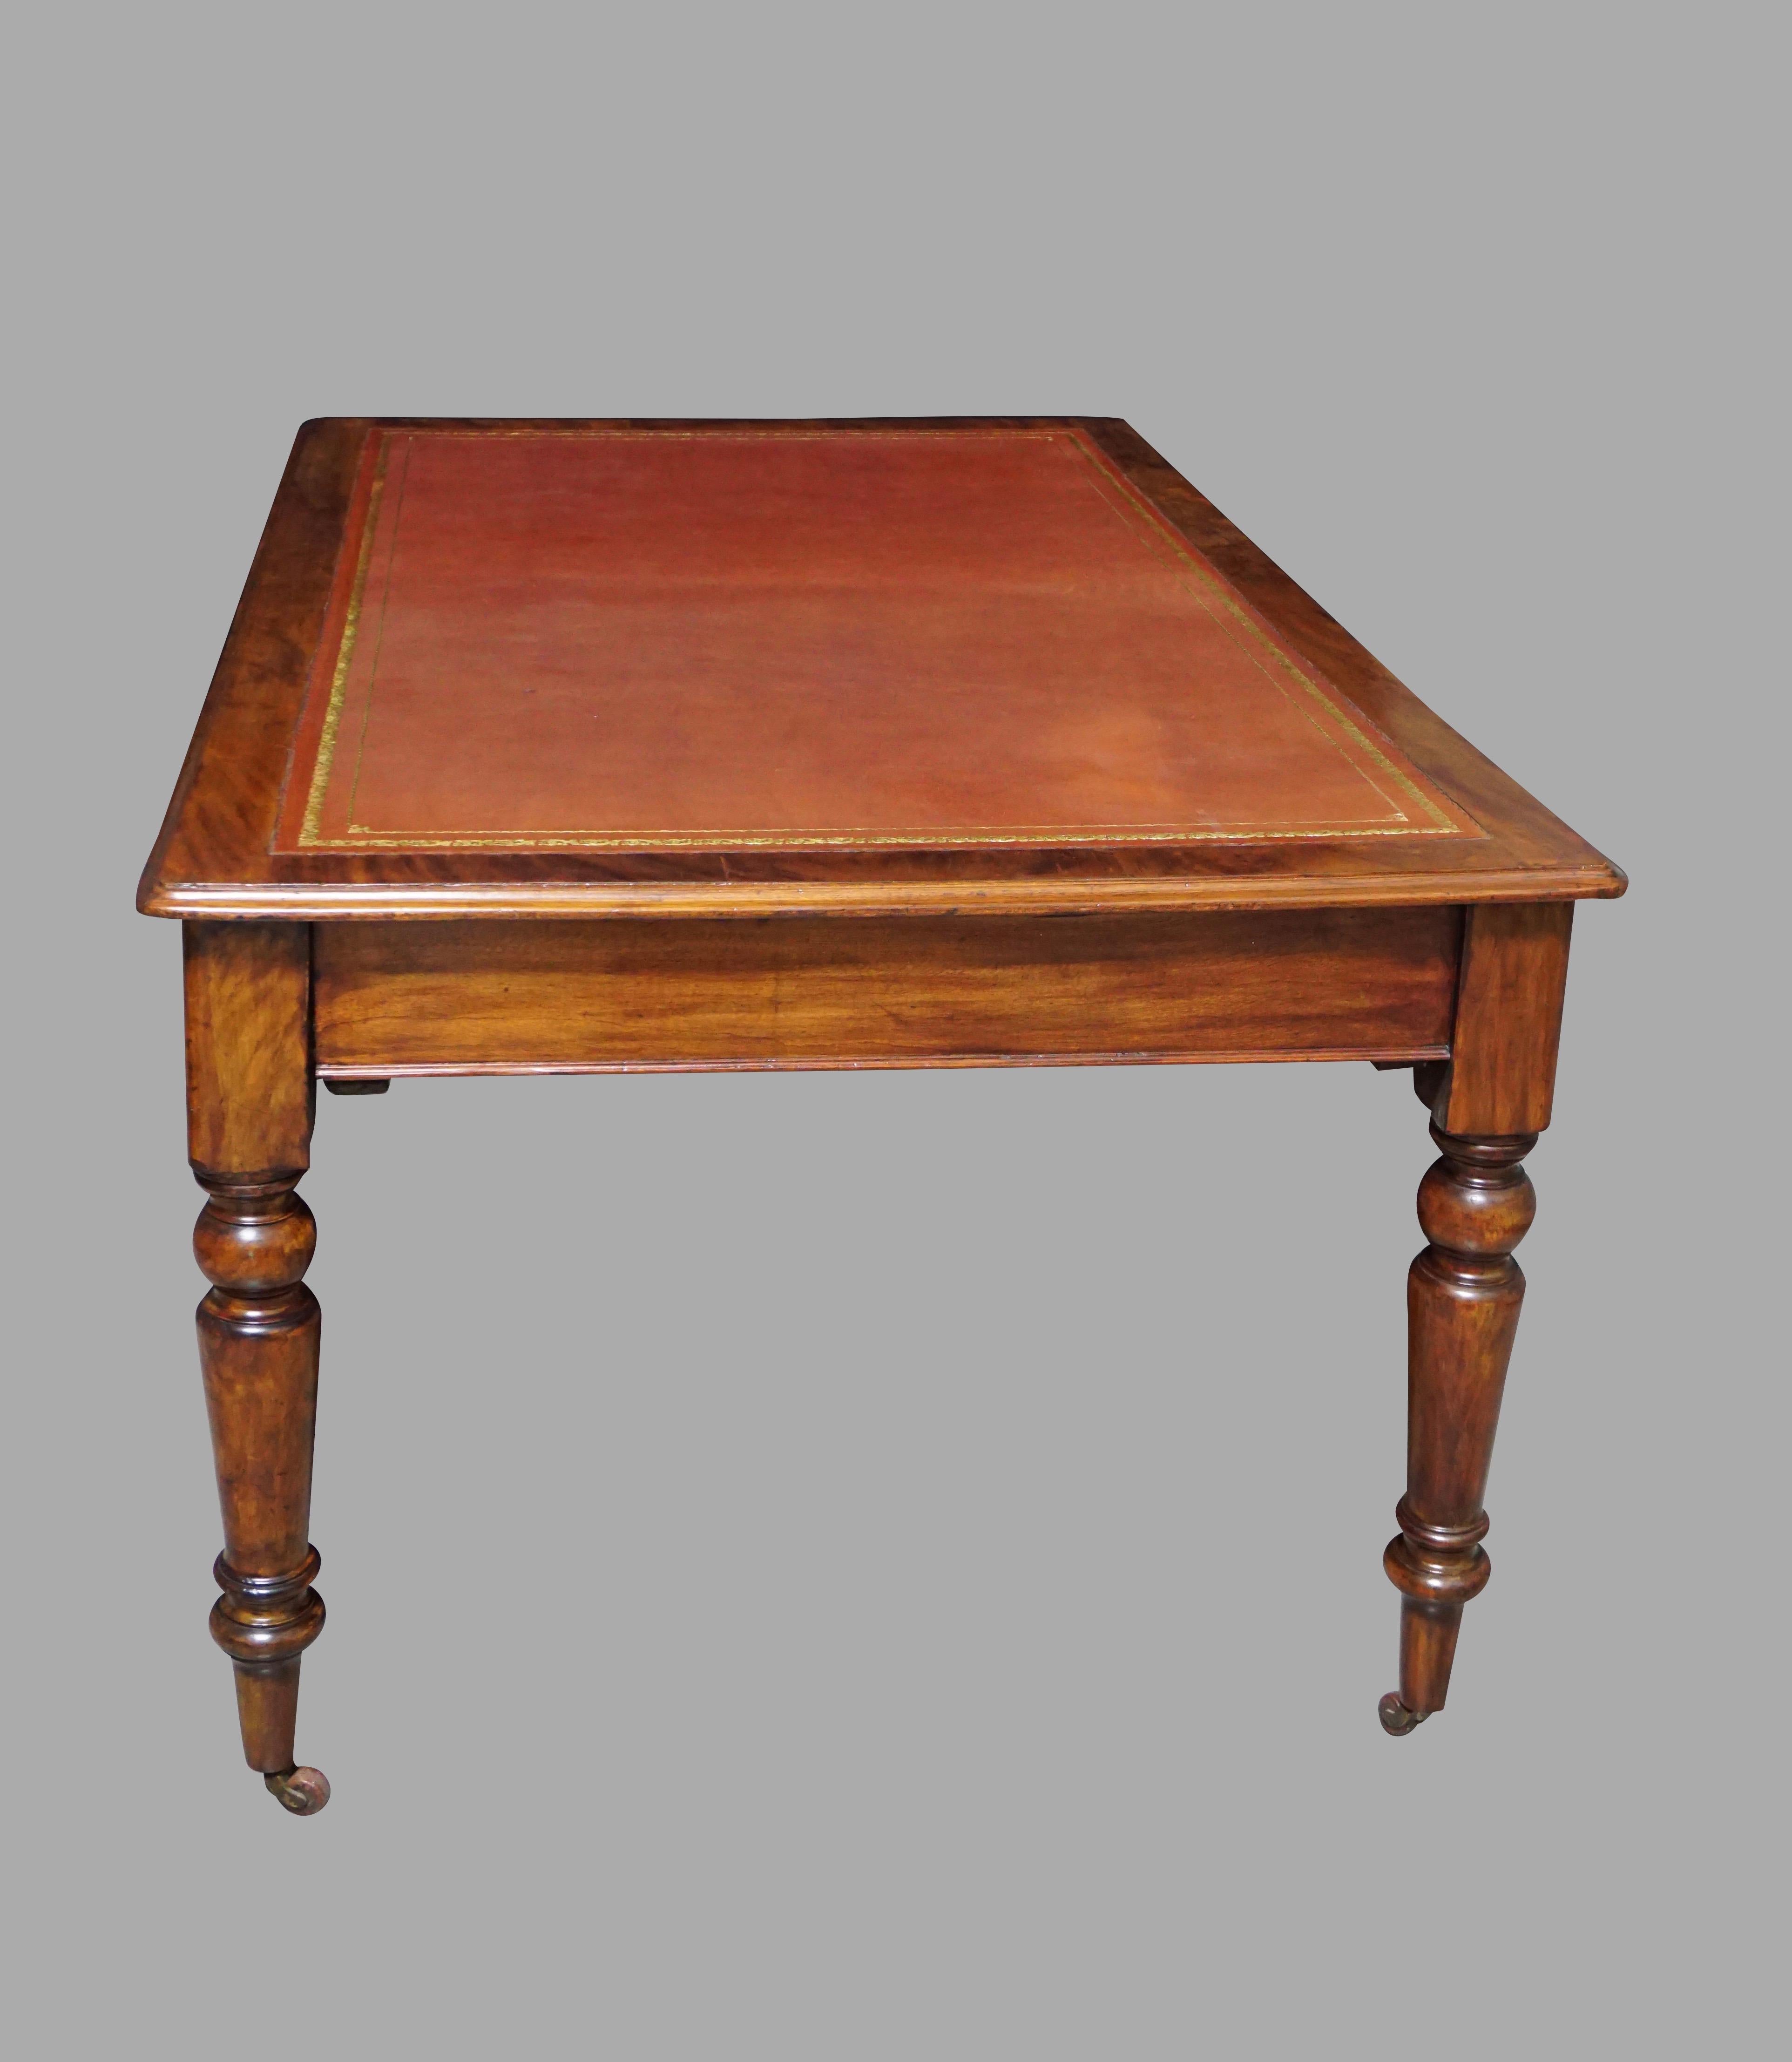 English William IV Mahogany Partners Writing Table with Leather Top